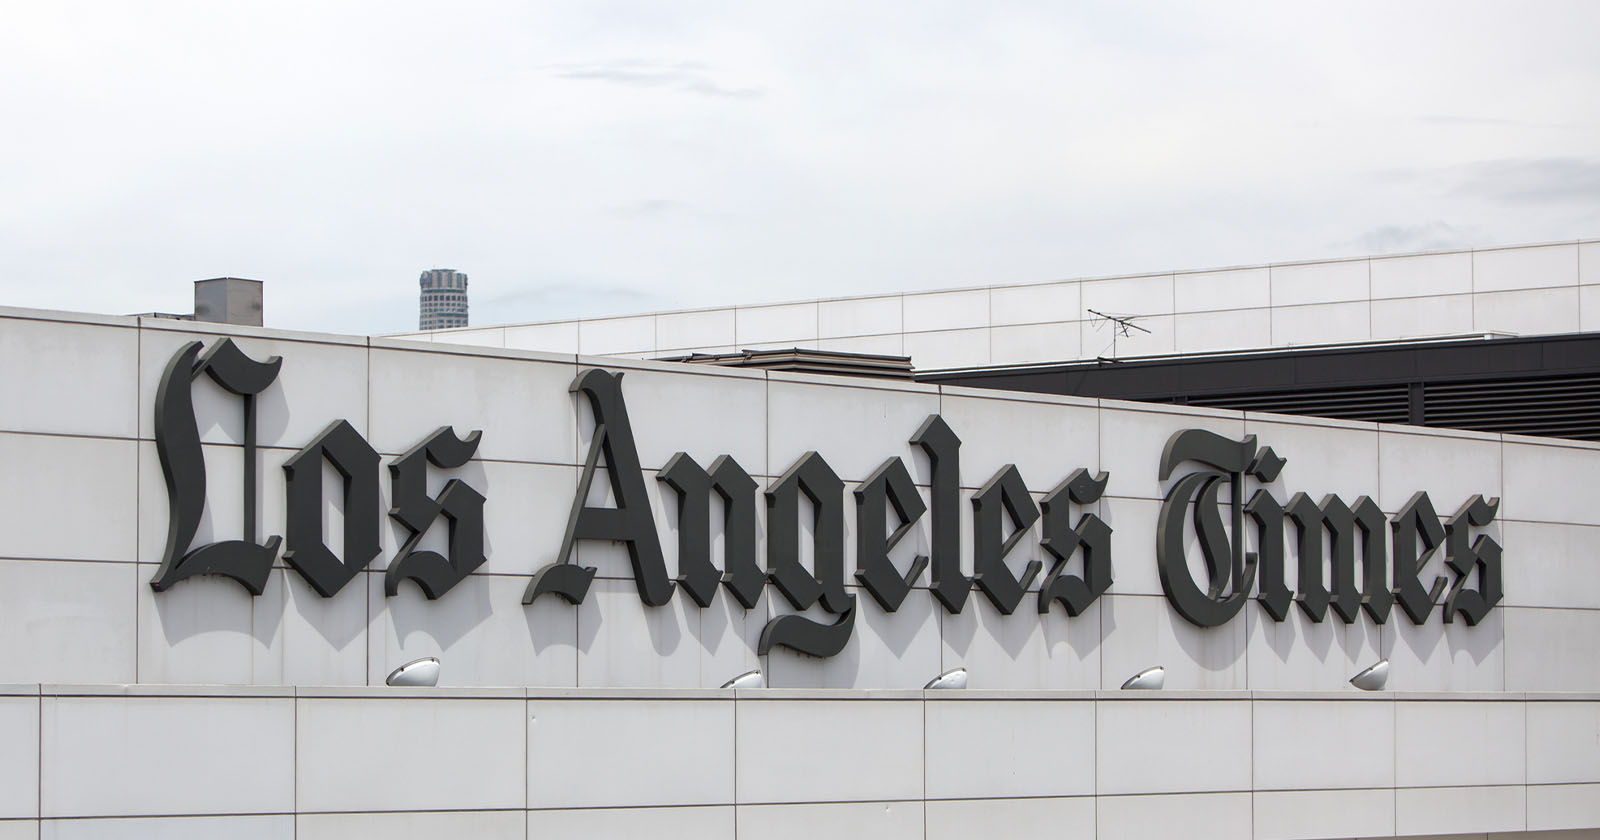 LA Times Cuts 74 Newsroom Positions Including Several Photographers